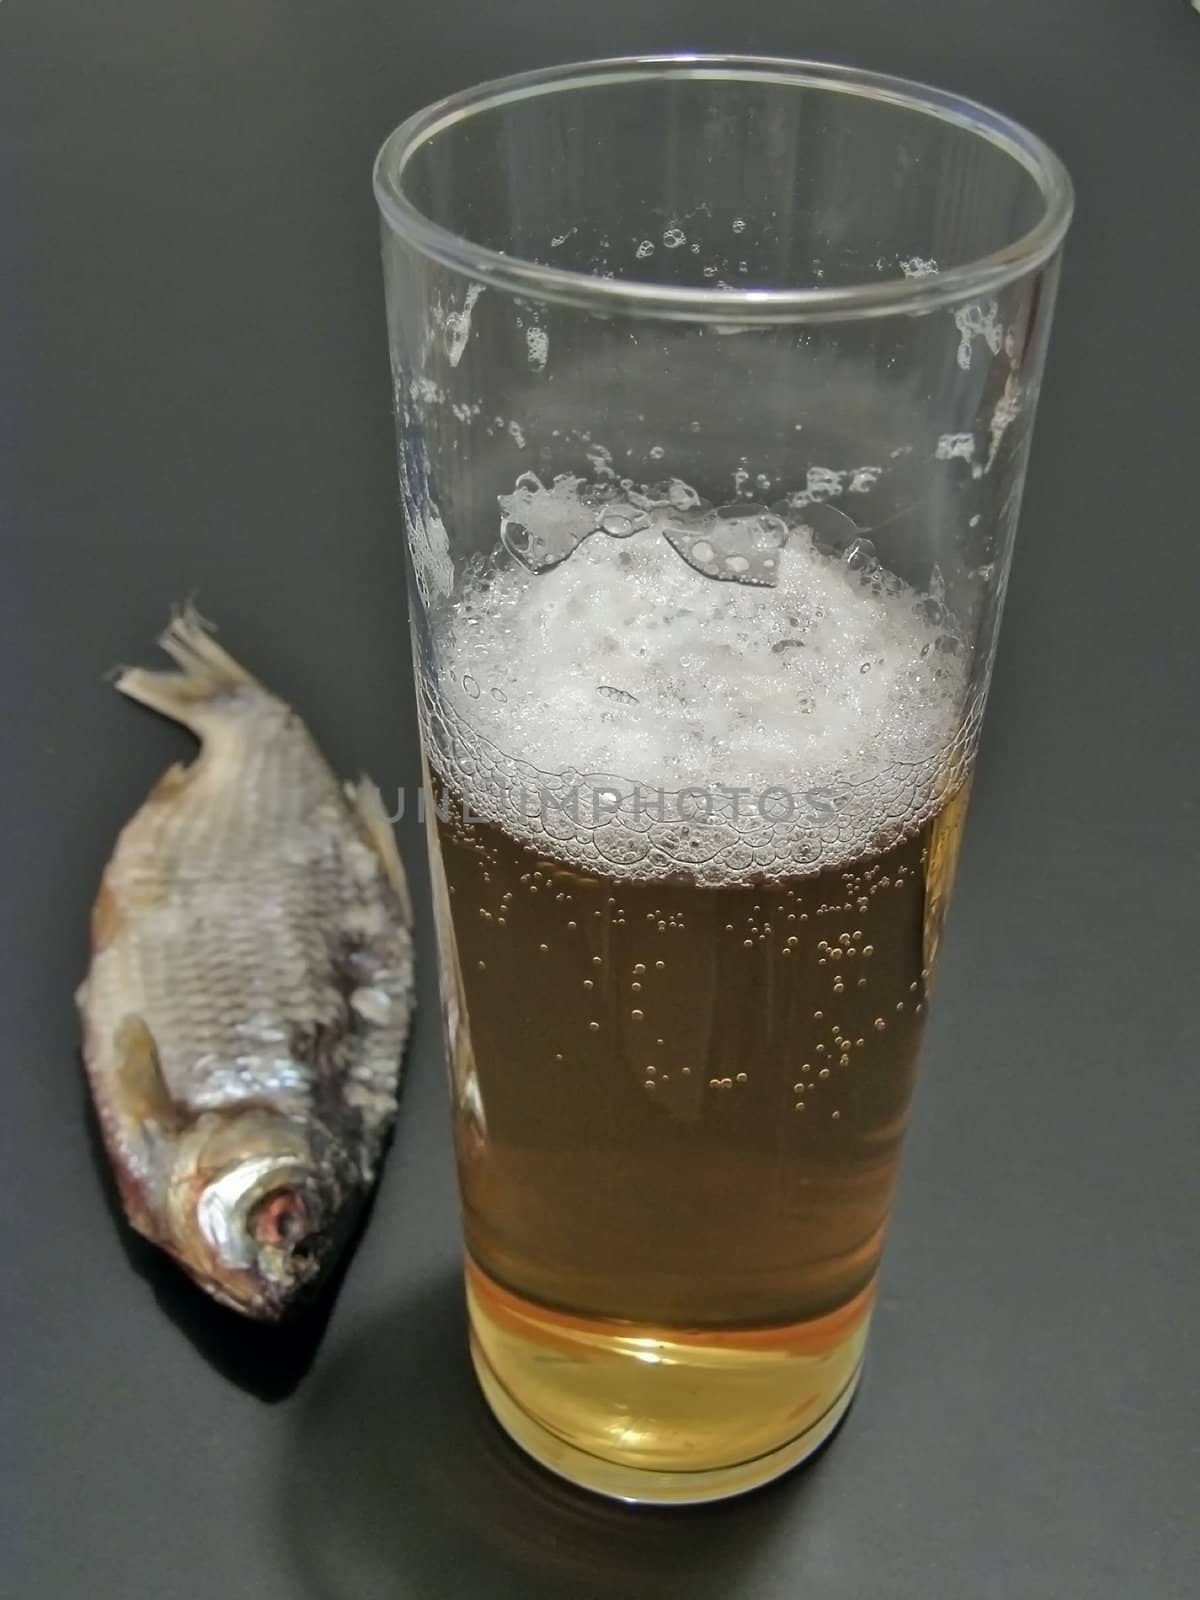 Dry fish near the glass of beer        